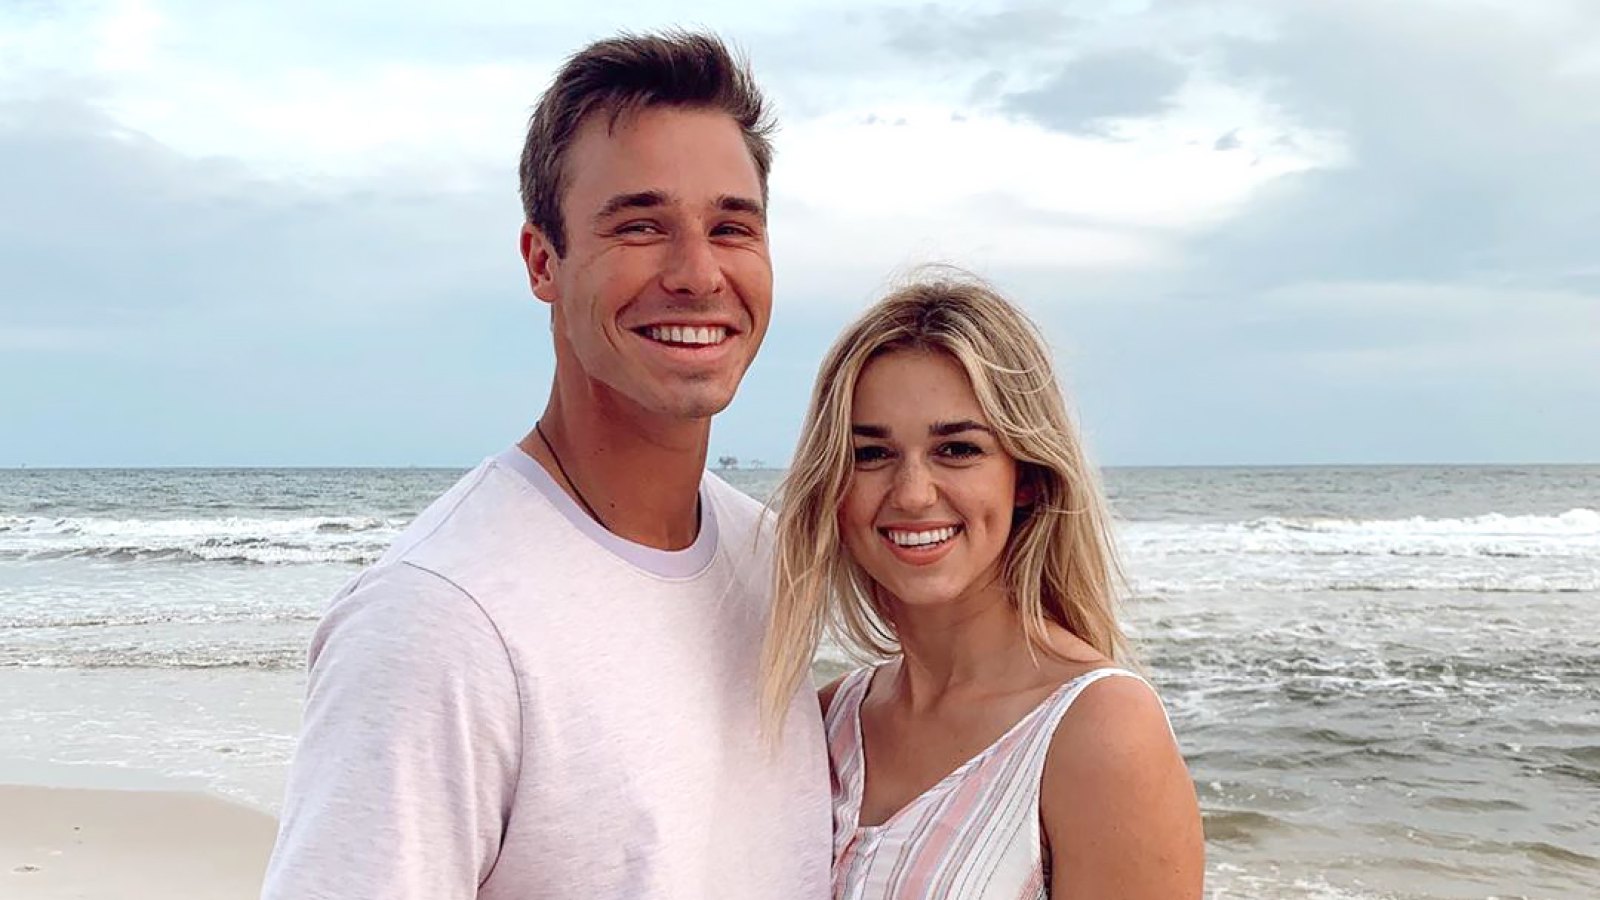 Sadie Robertson Gives a Tour of Her Family's Louisiana House, Shows Off Her 'Amazing' Wedding Locale